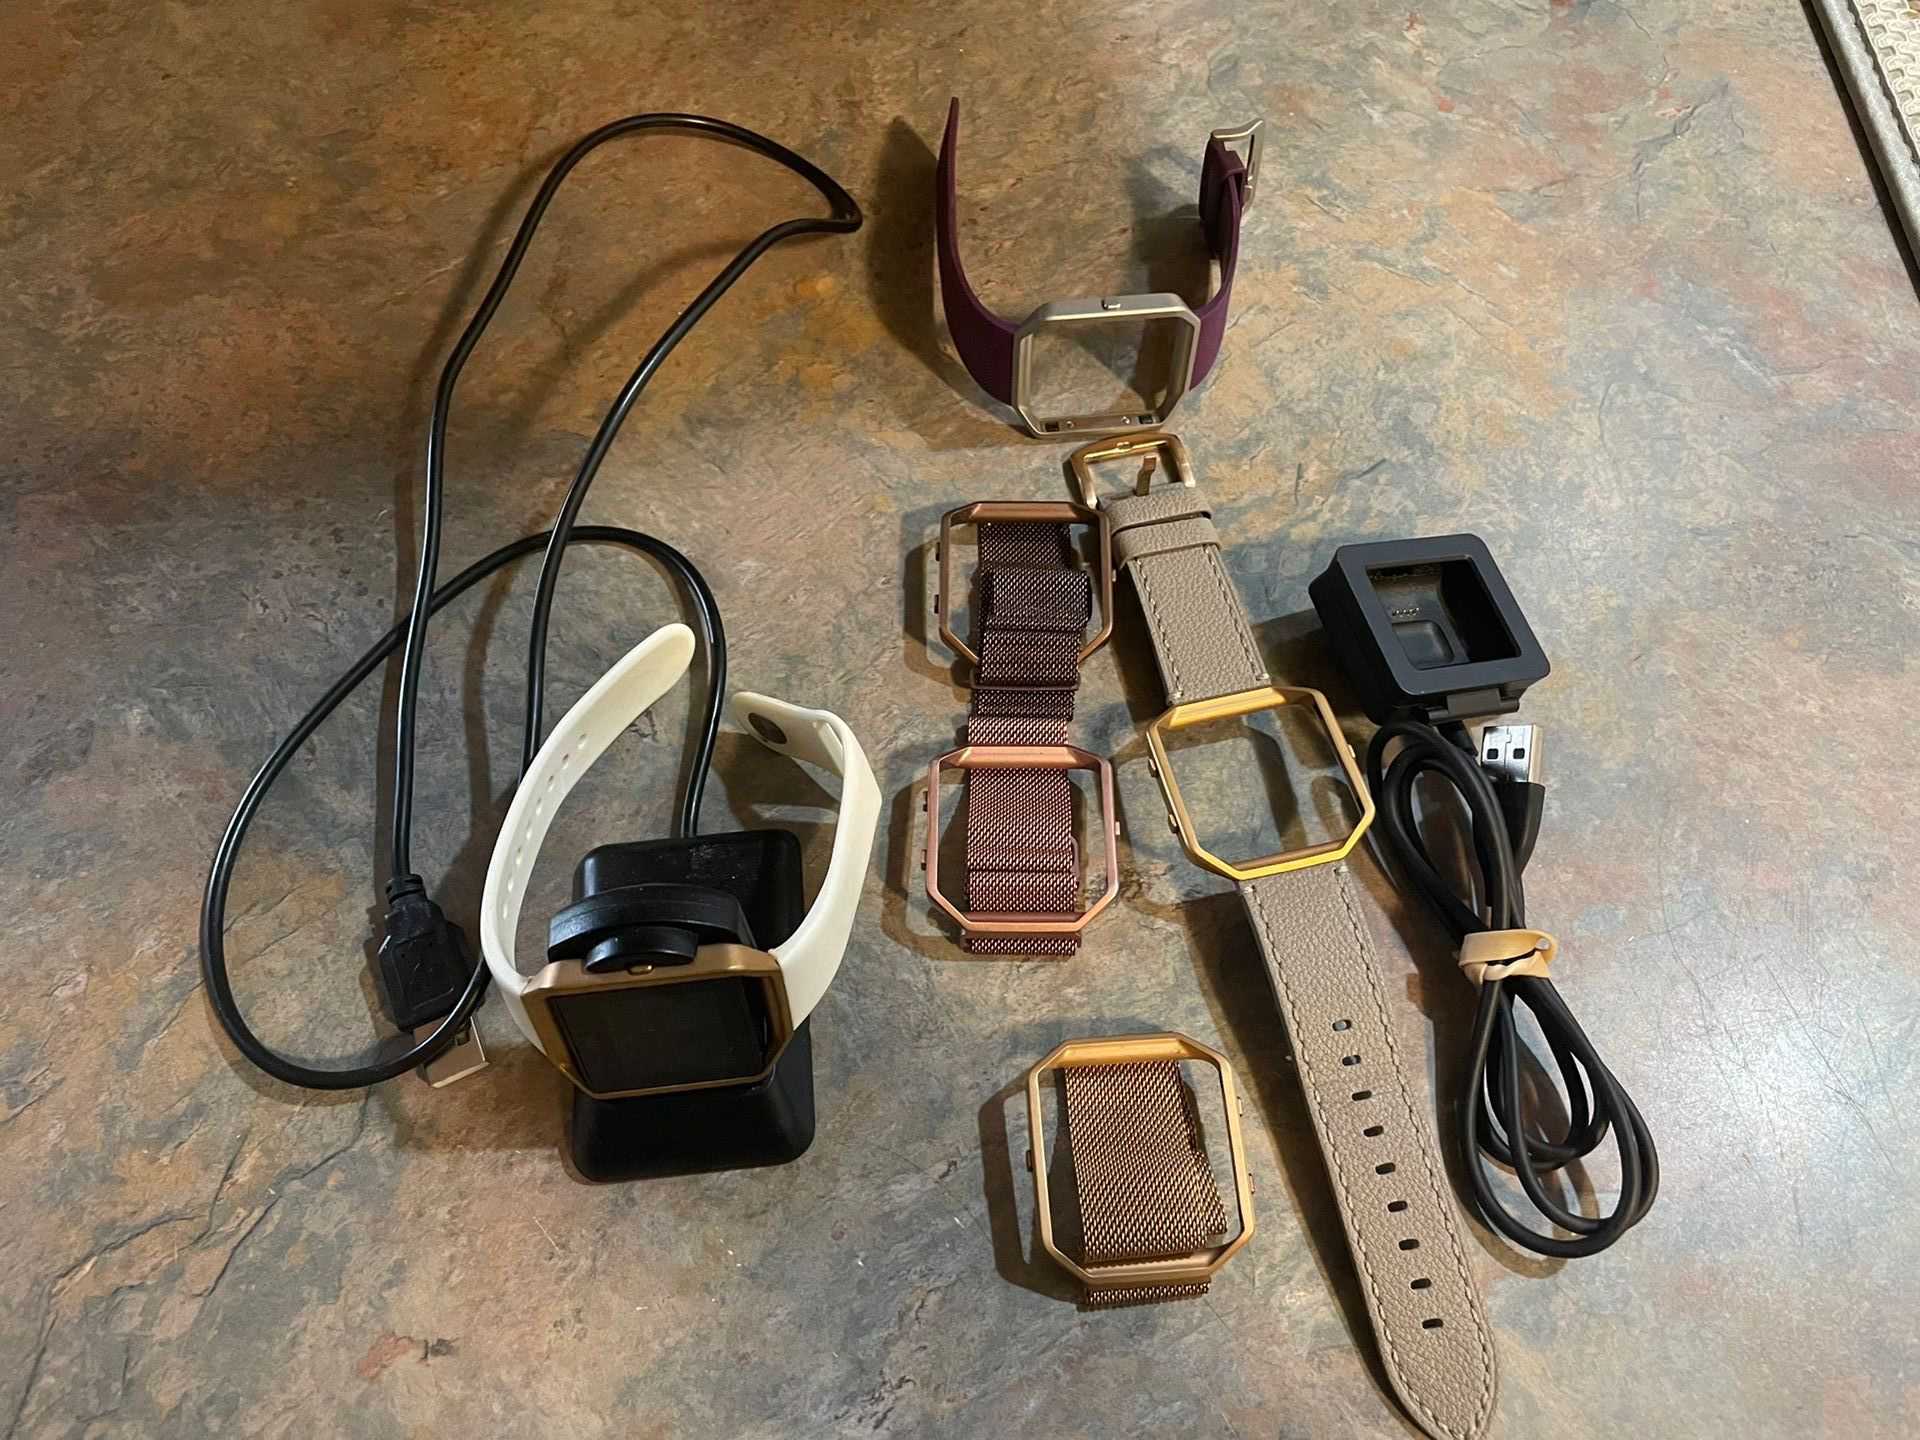 Fitbit Smart Fitness Watch - 6 Changable Wrist Straps And Two Chargers